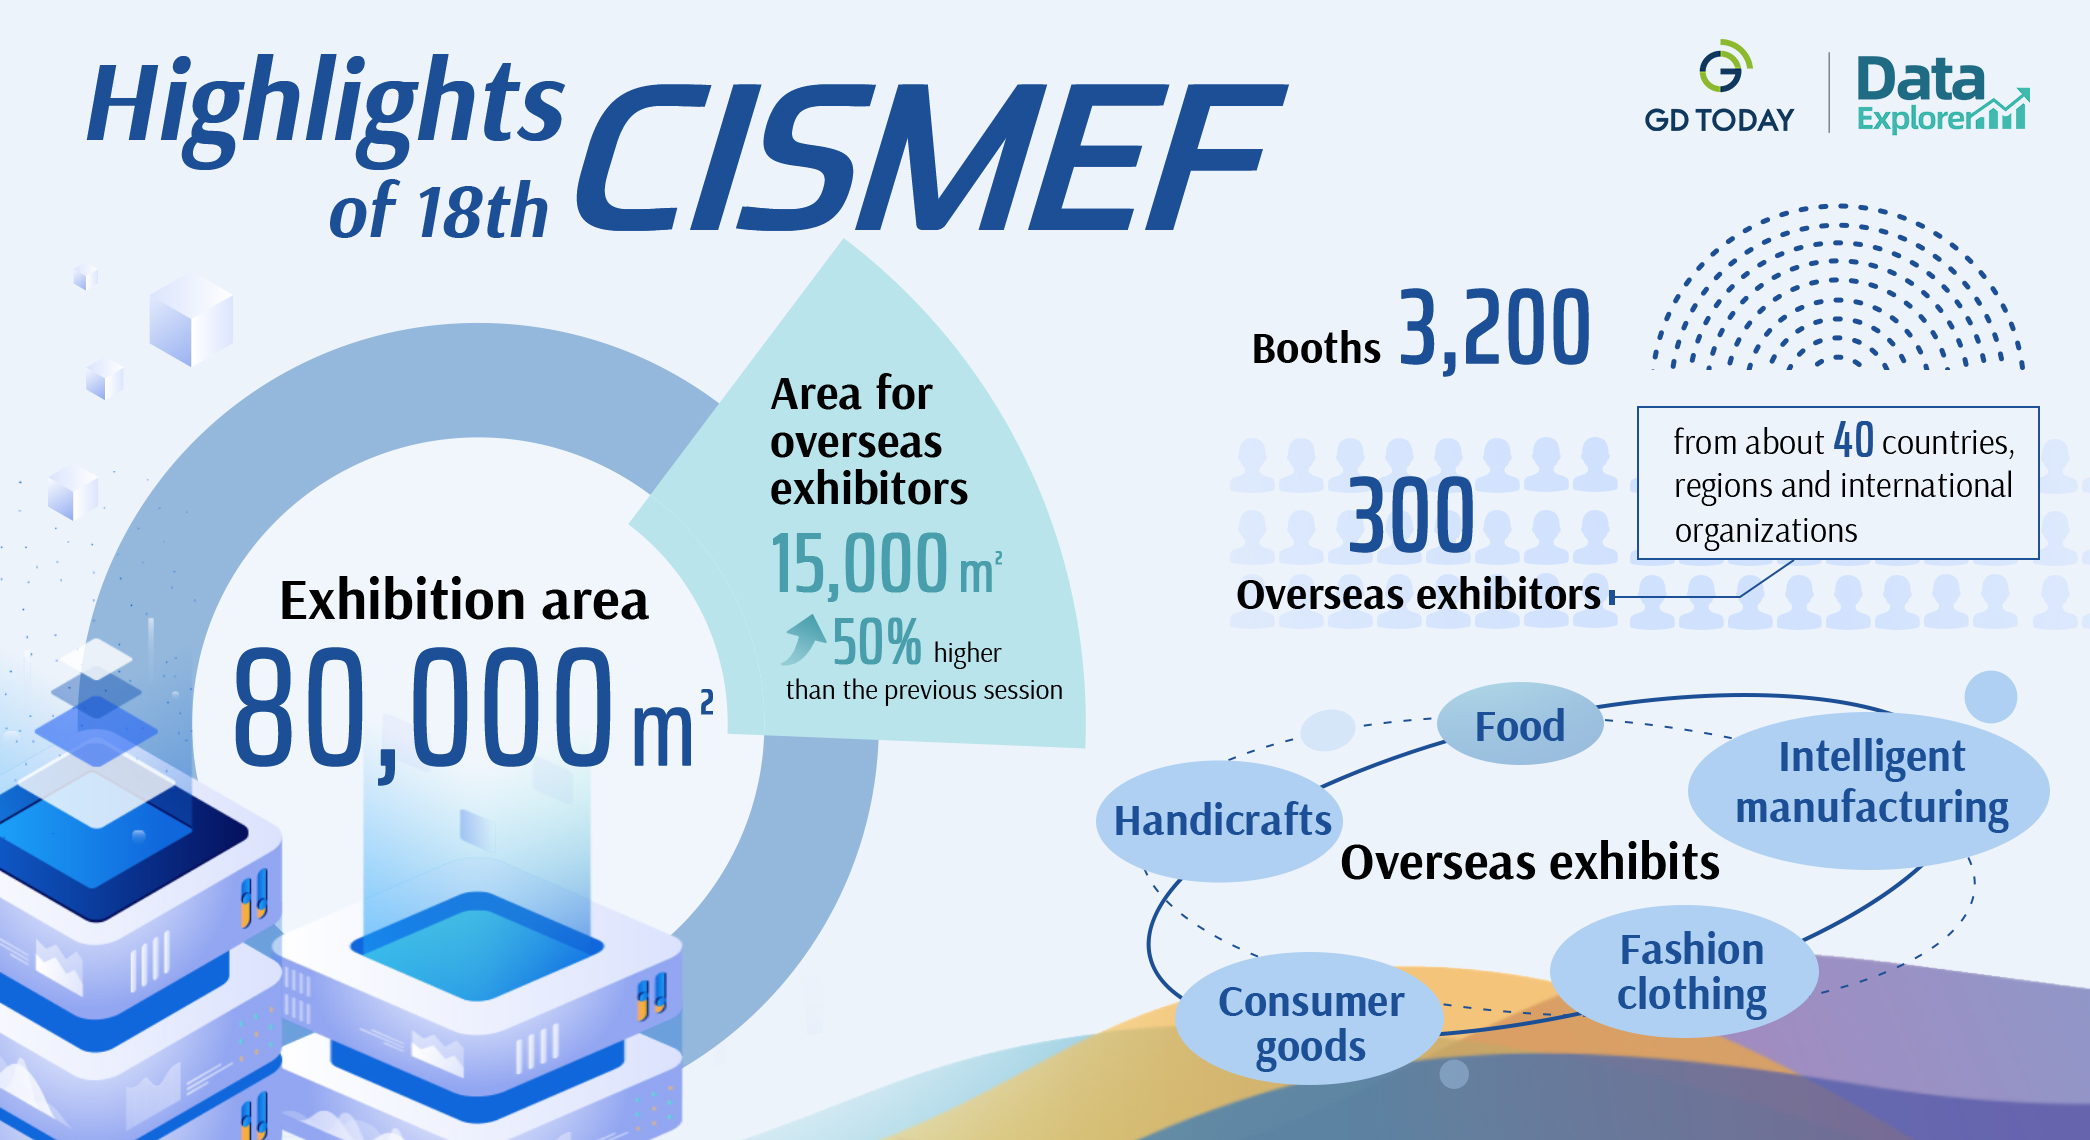 Overseas exhibition area of CISMEF up 50% over the last session